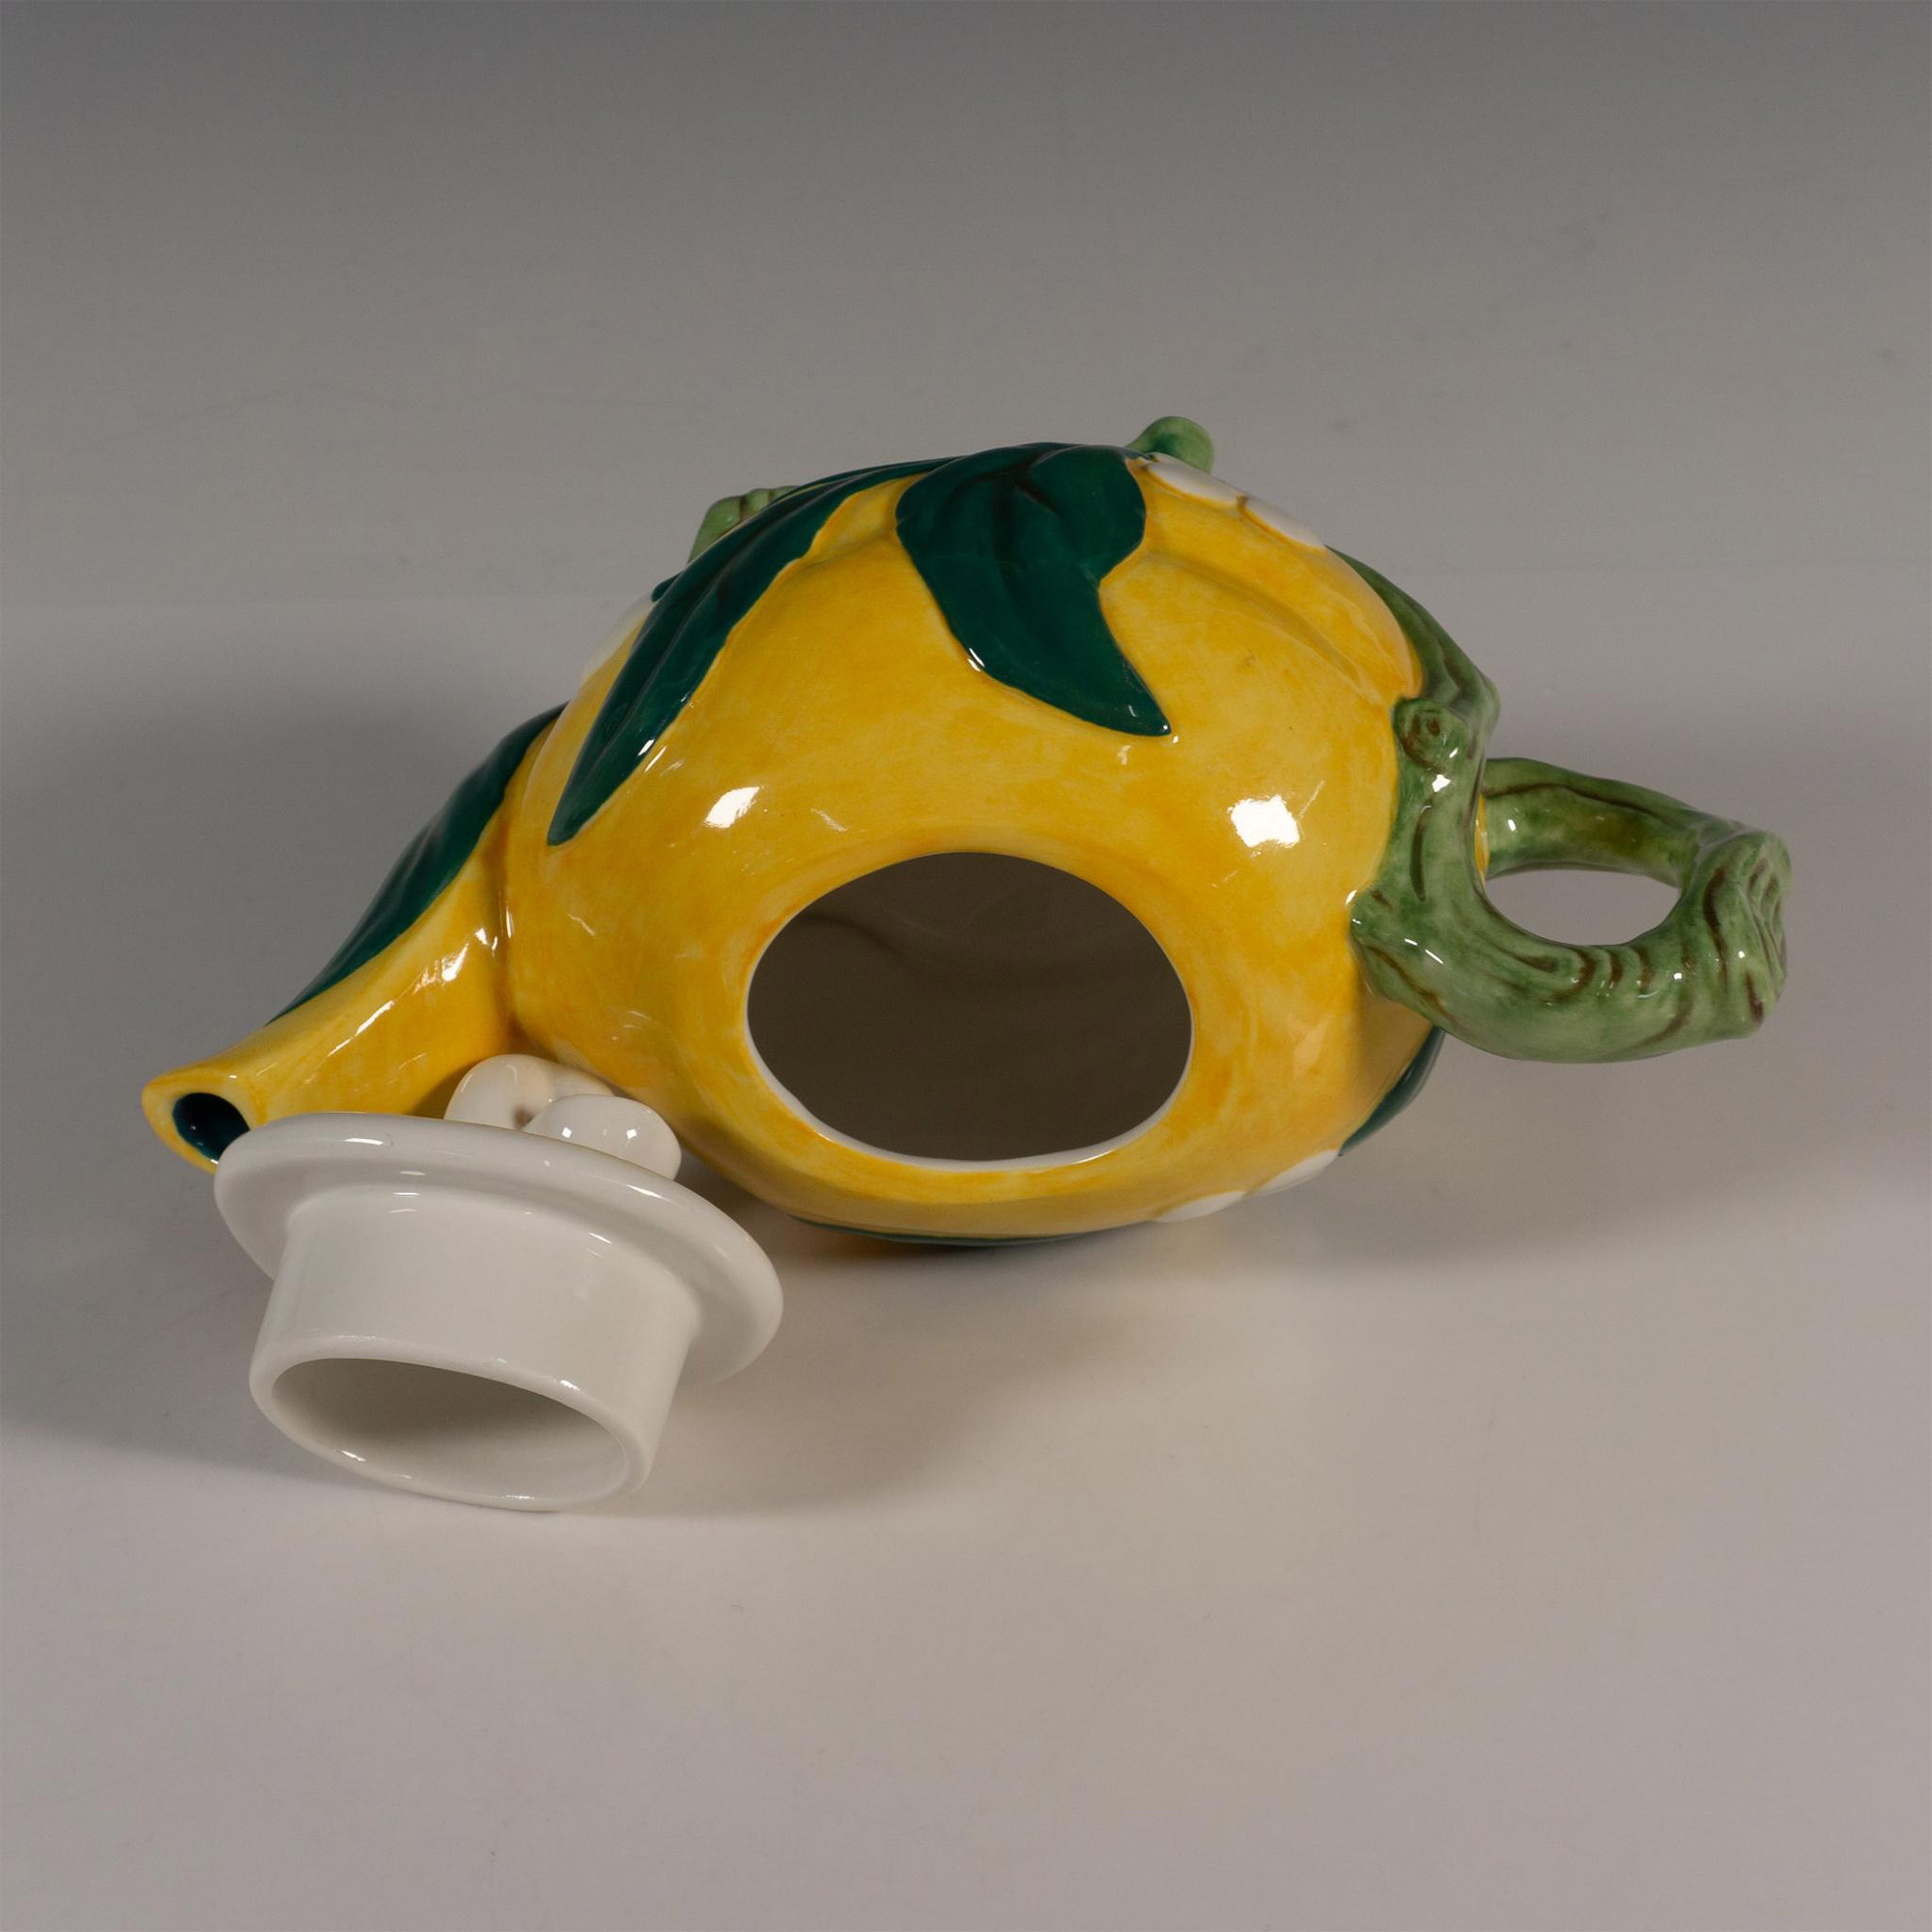 Minton Archive Collection Limited Edition Mushroom Teapot - Image 5 of 5